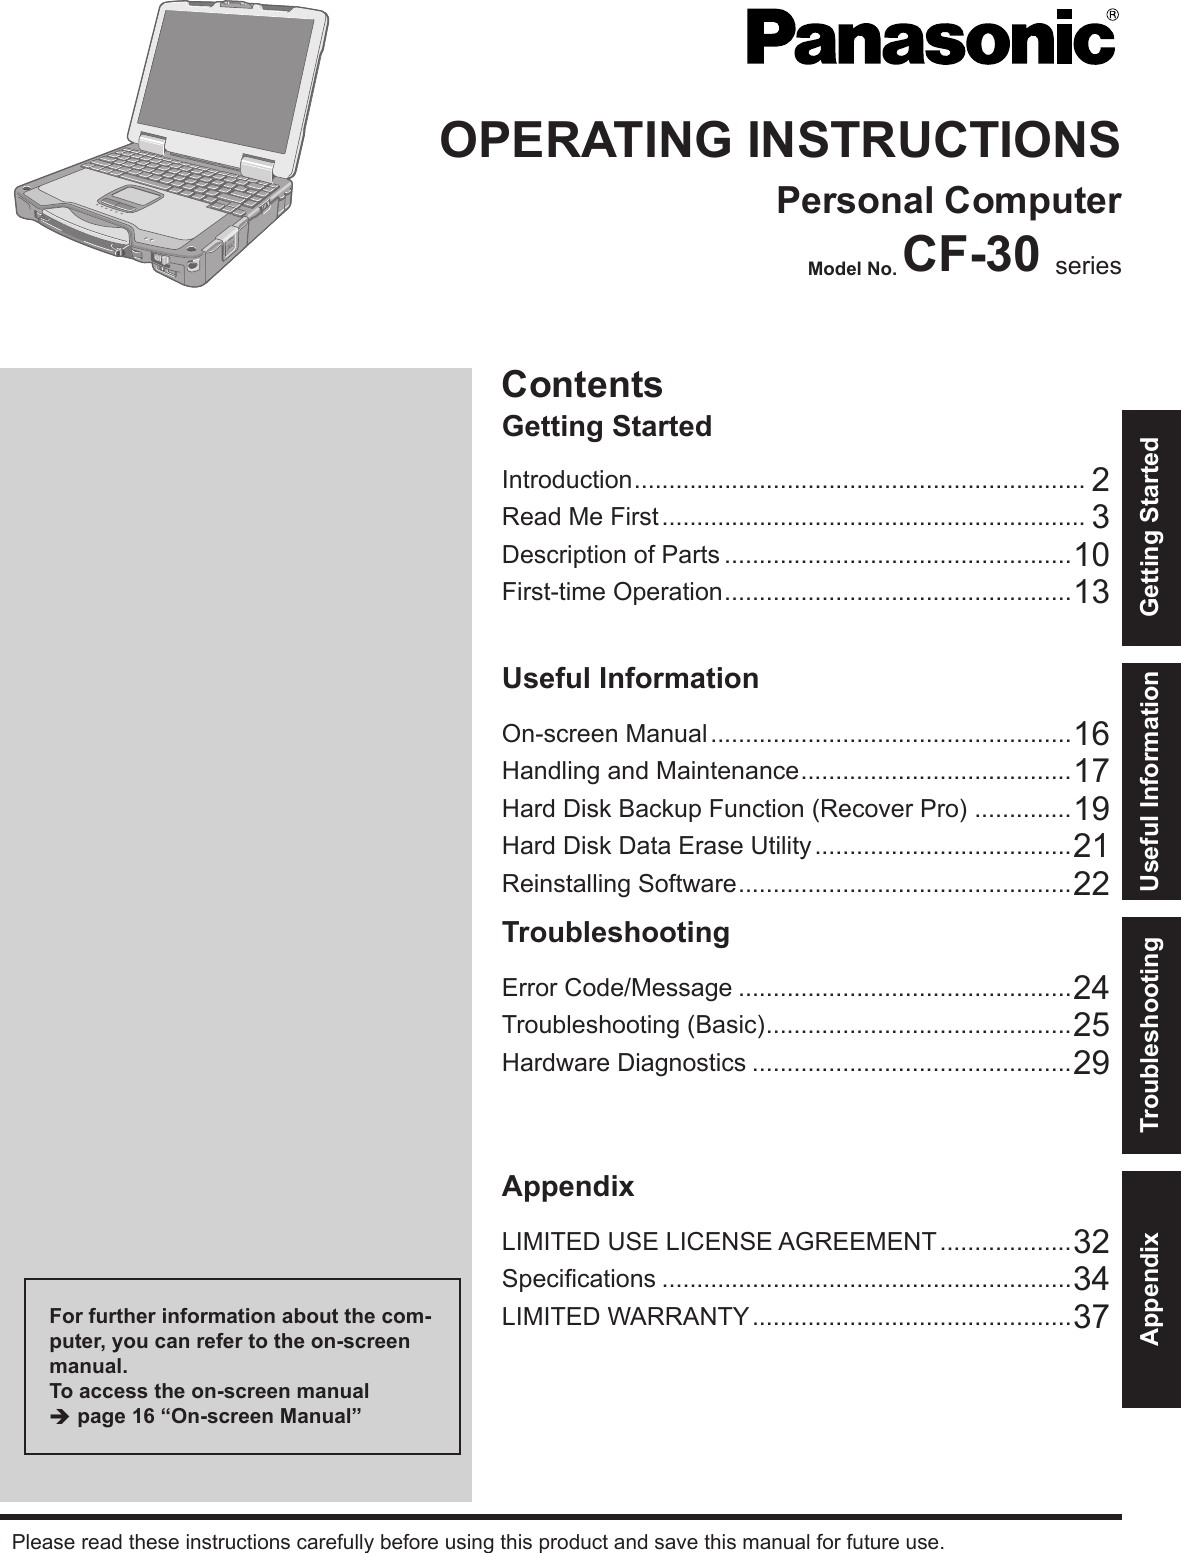 ContentsGetting StartedOPERATING INSTRUCTIONSPersonal ComputerModel No. CF-30 seriesIntroduction ................................................................. 2Read Me First ............................................................. 3Description of Parts ..................................................10First-time Operation ..................................................13Useful InformationOn-screen Manual ....................................................16Handling and Maintenance .......................................17Hard Disk Backup Function (Recover Pro) ..............19Hard Disk Data Erase Utility .....................................21Reinstalling Software ................................................22TroubleshootingError Code/Message ................................................24Troubleshooting (Basic) ............................................25Hardware Diagnostics ..............................................29AppendixLIMITED USE LICENSE AGREEMENT ...................32Speciﬁ cations ...........................................................34LIMITED WARRANTY ..............................................37Please read these instructions carefully before using this product and save this manual for future use.For further information about the com-puter, you can refer to the on-screen manual.To access the on-screen manual  page 16 “On-screen Manual”Getting StartedUseful InformationTroubleshootingAppendix